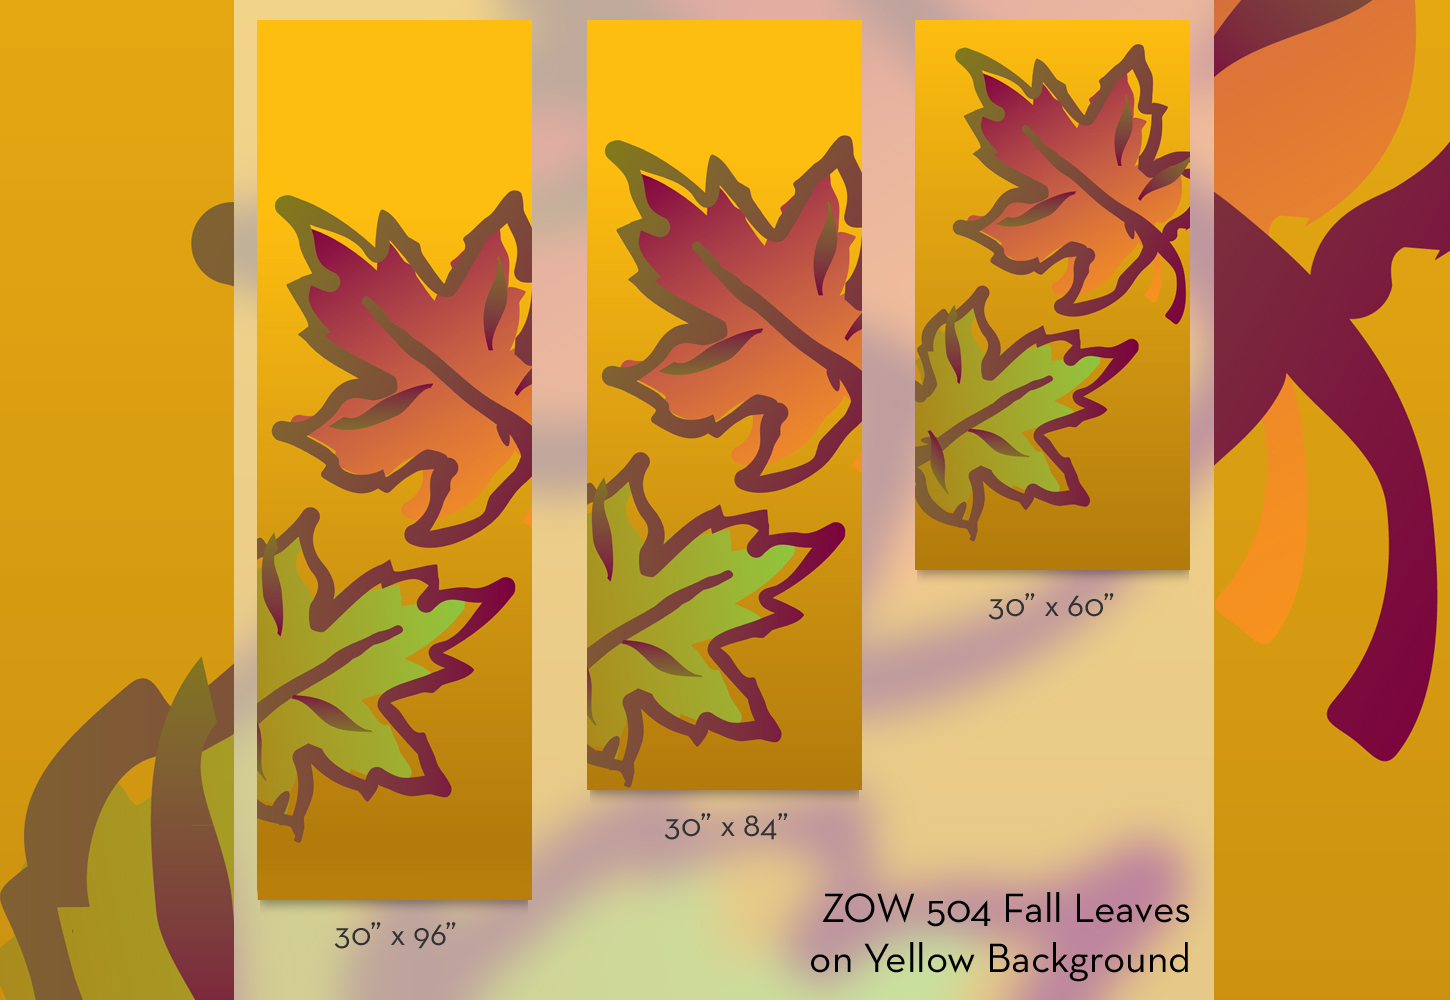 ZOW 504 Fall Leaves on Yellow Background